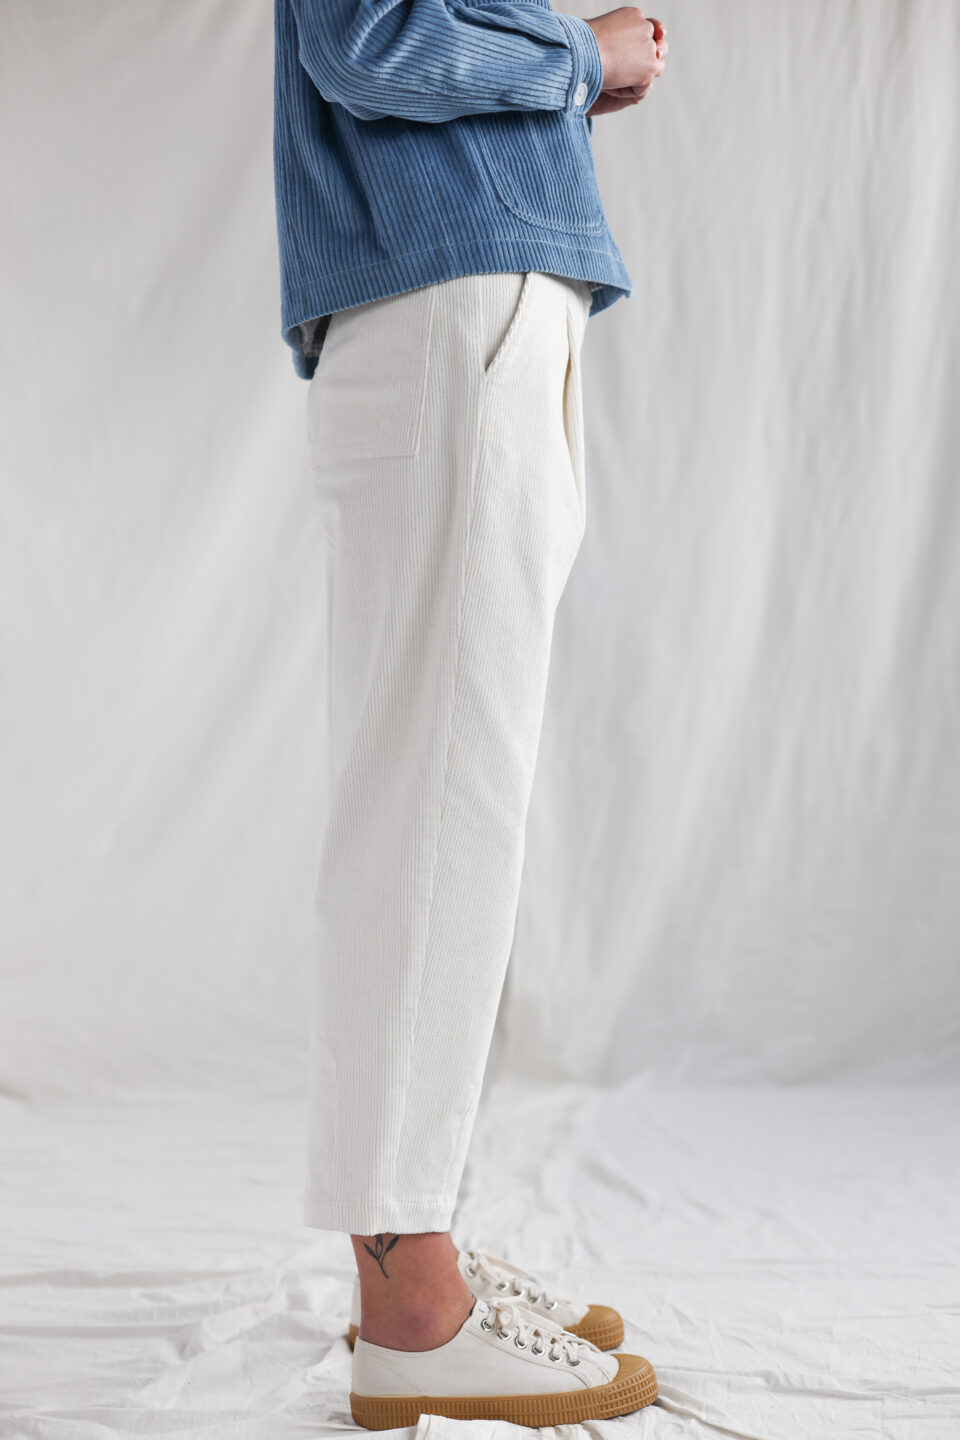 Boxy tapered leg needlecord trousers | Trousers | Sustainable clothing | OffOn clothing